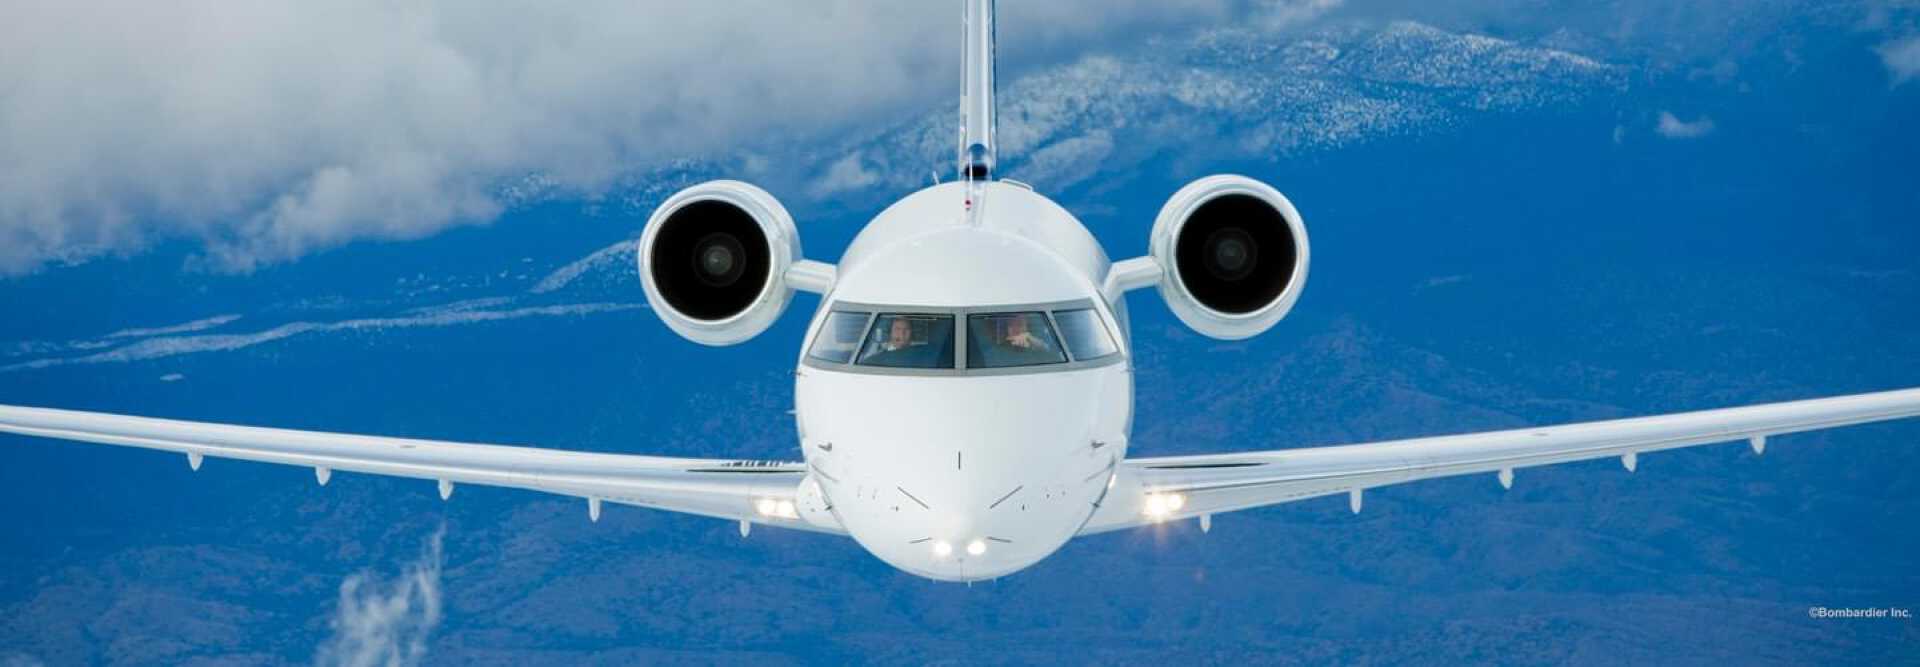 Large Business Jet Bombardier Challenger 604 to charter with LunaJets, transcontinental, Corporate jet,extra-wide cabin, comfort, atmosphere